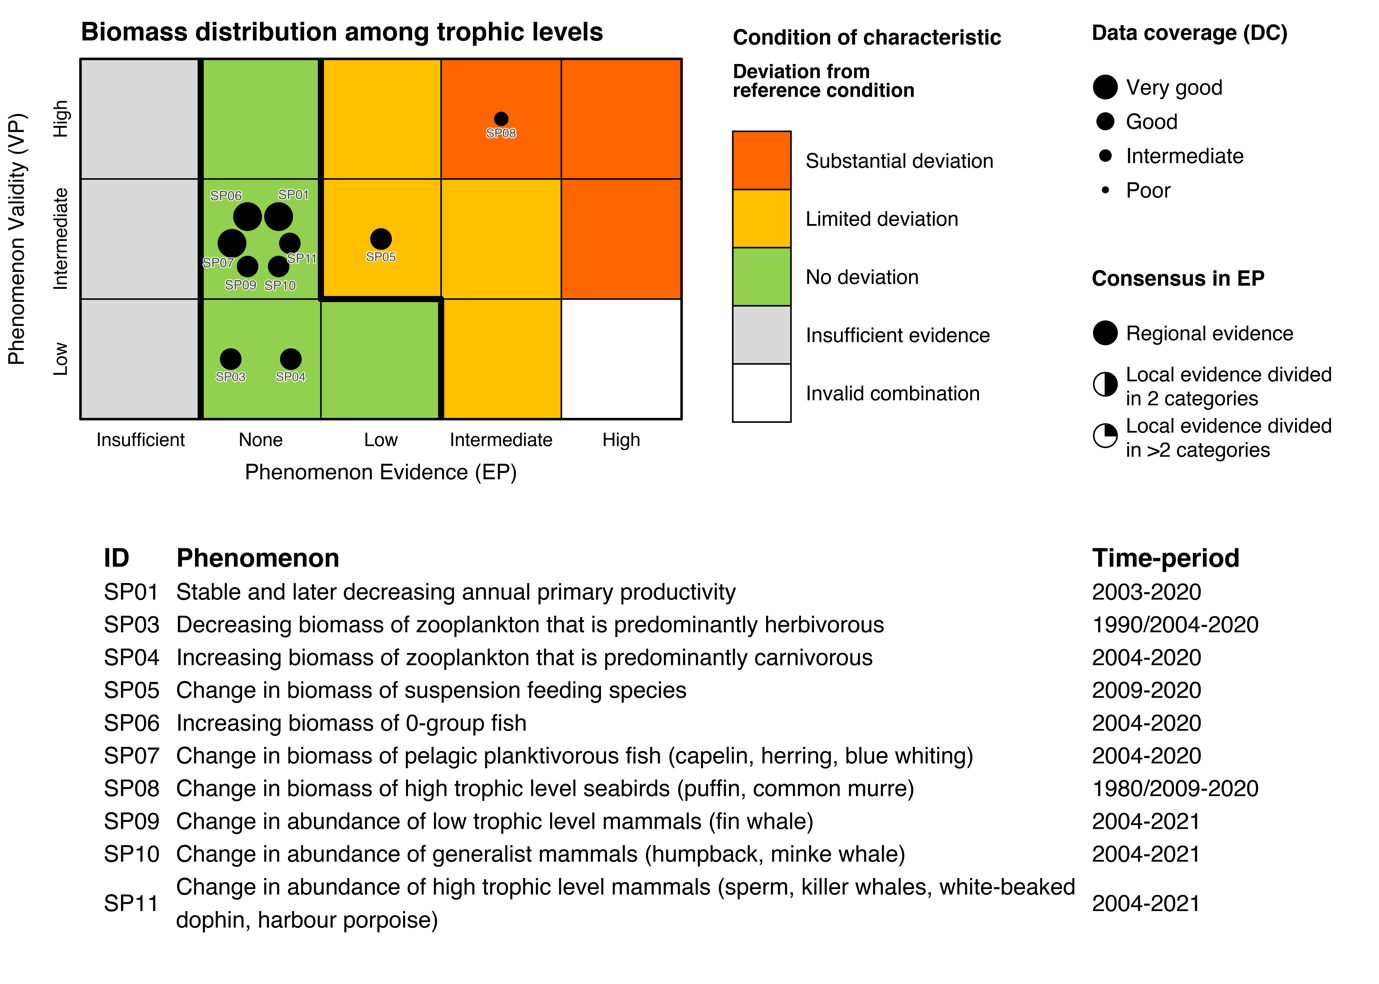 Figure 7.3.1b(ii): The PAEC assessment diagram for the Biomass distribution among trophic levels ecosystem characteristic of the Sub-Arctic part of the Barents Sea.